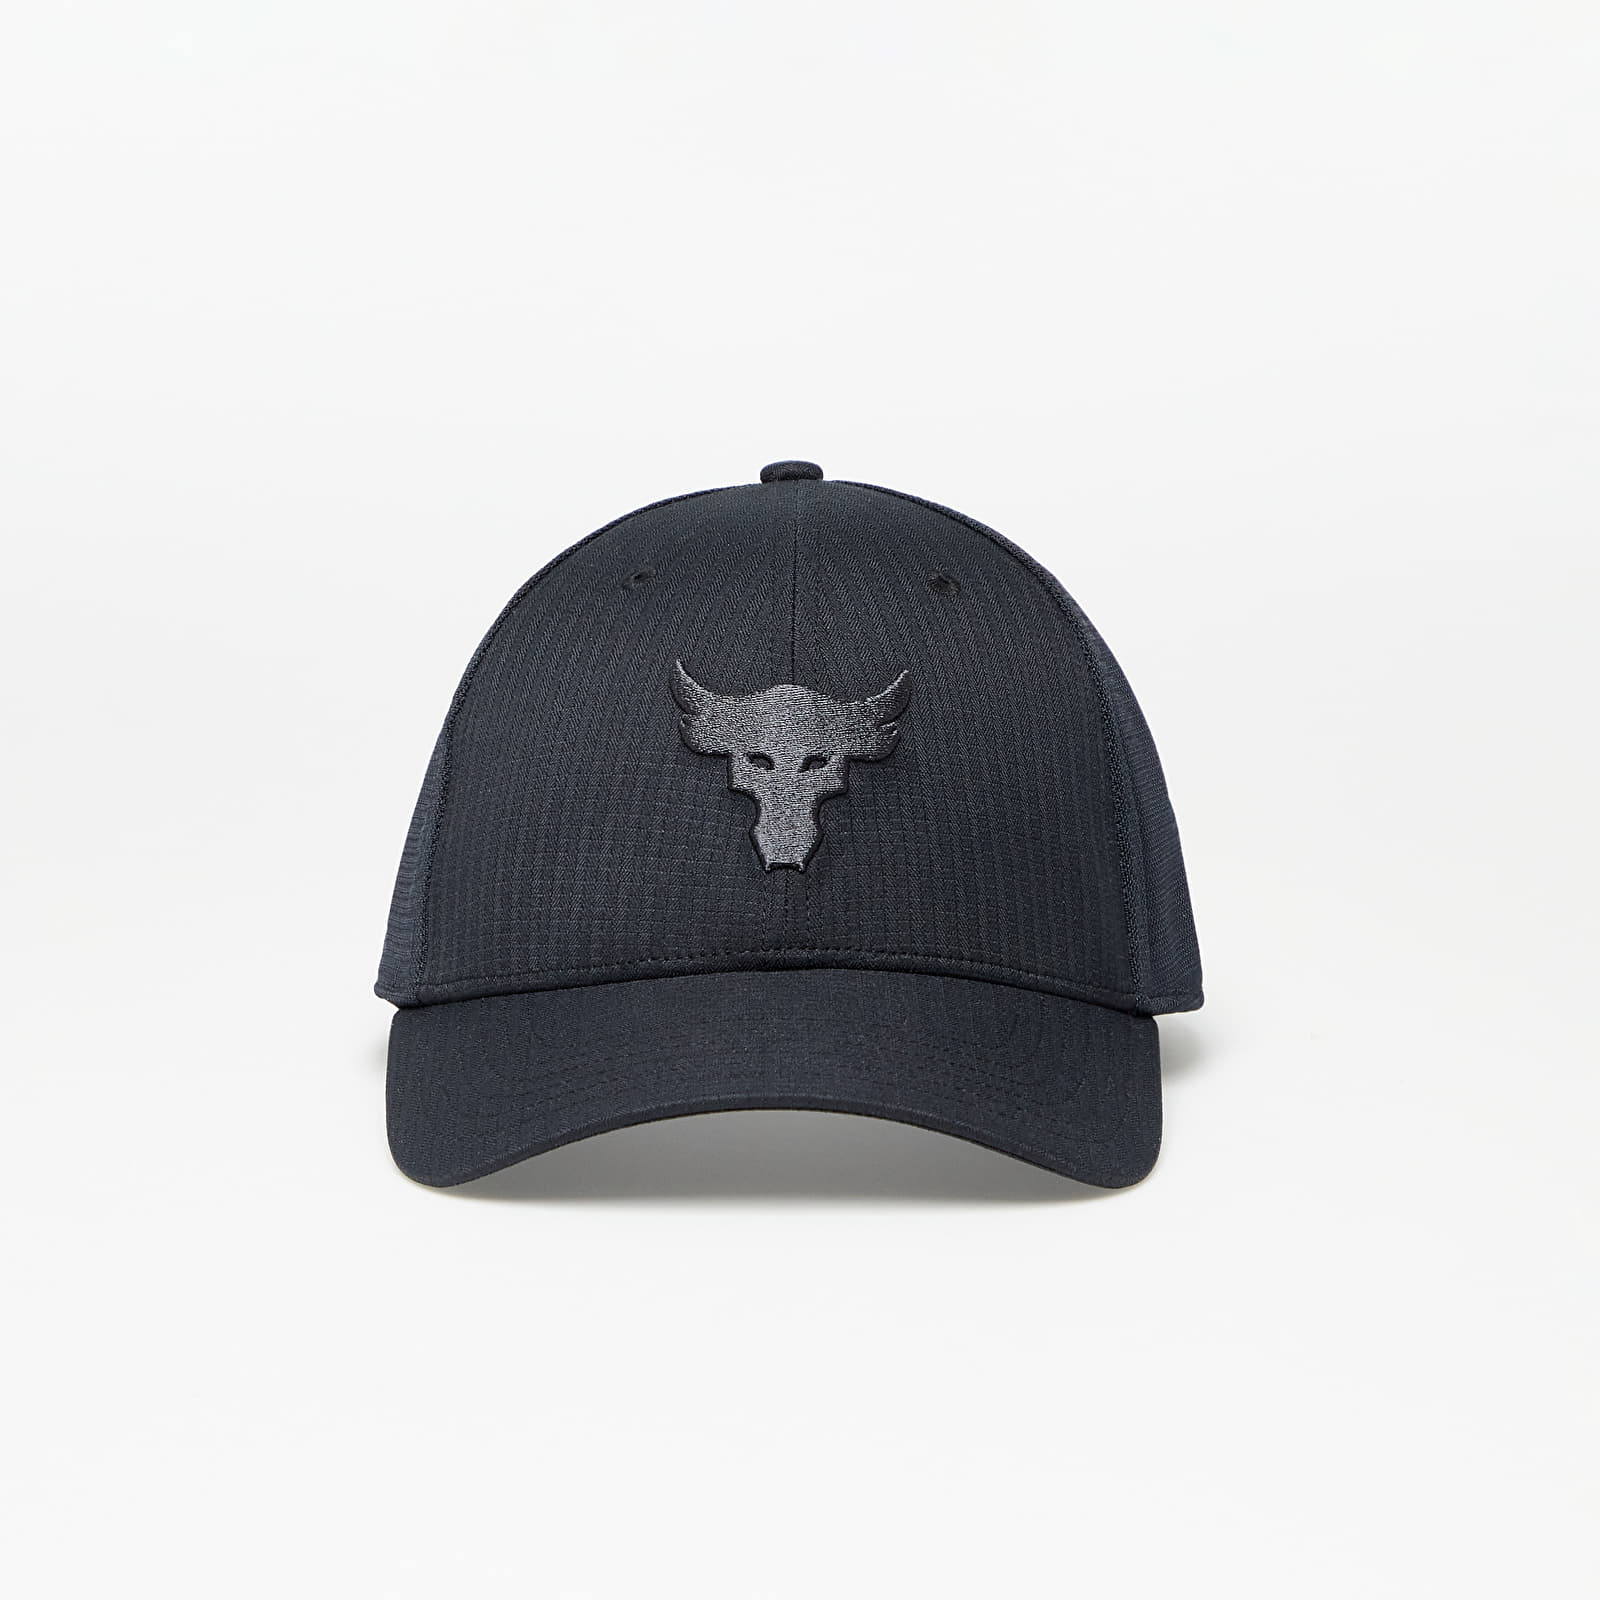 Under Armour Project Rock Trucker